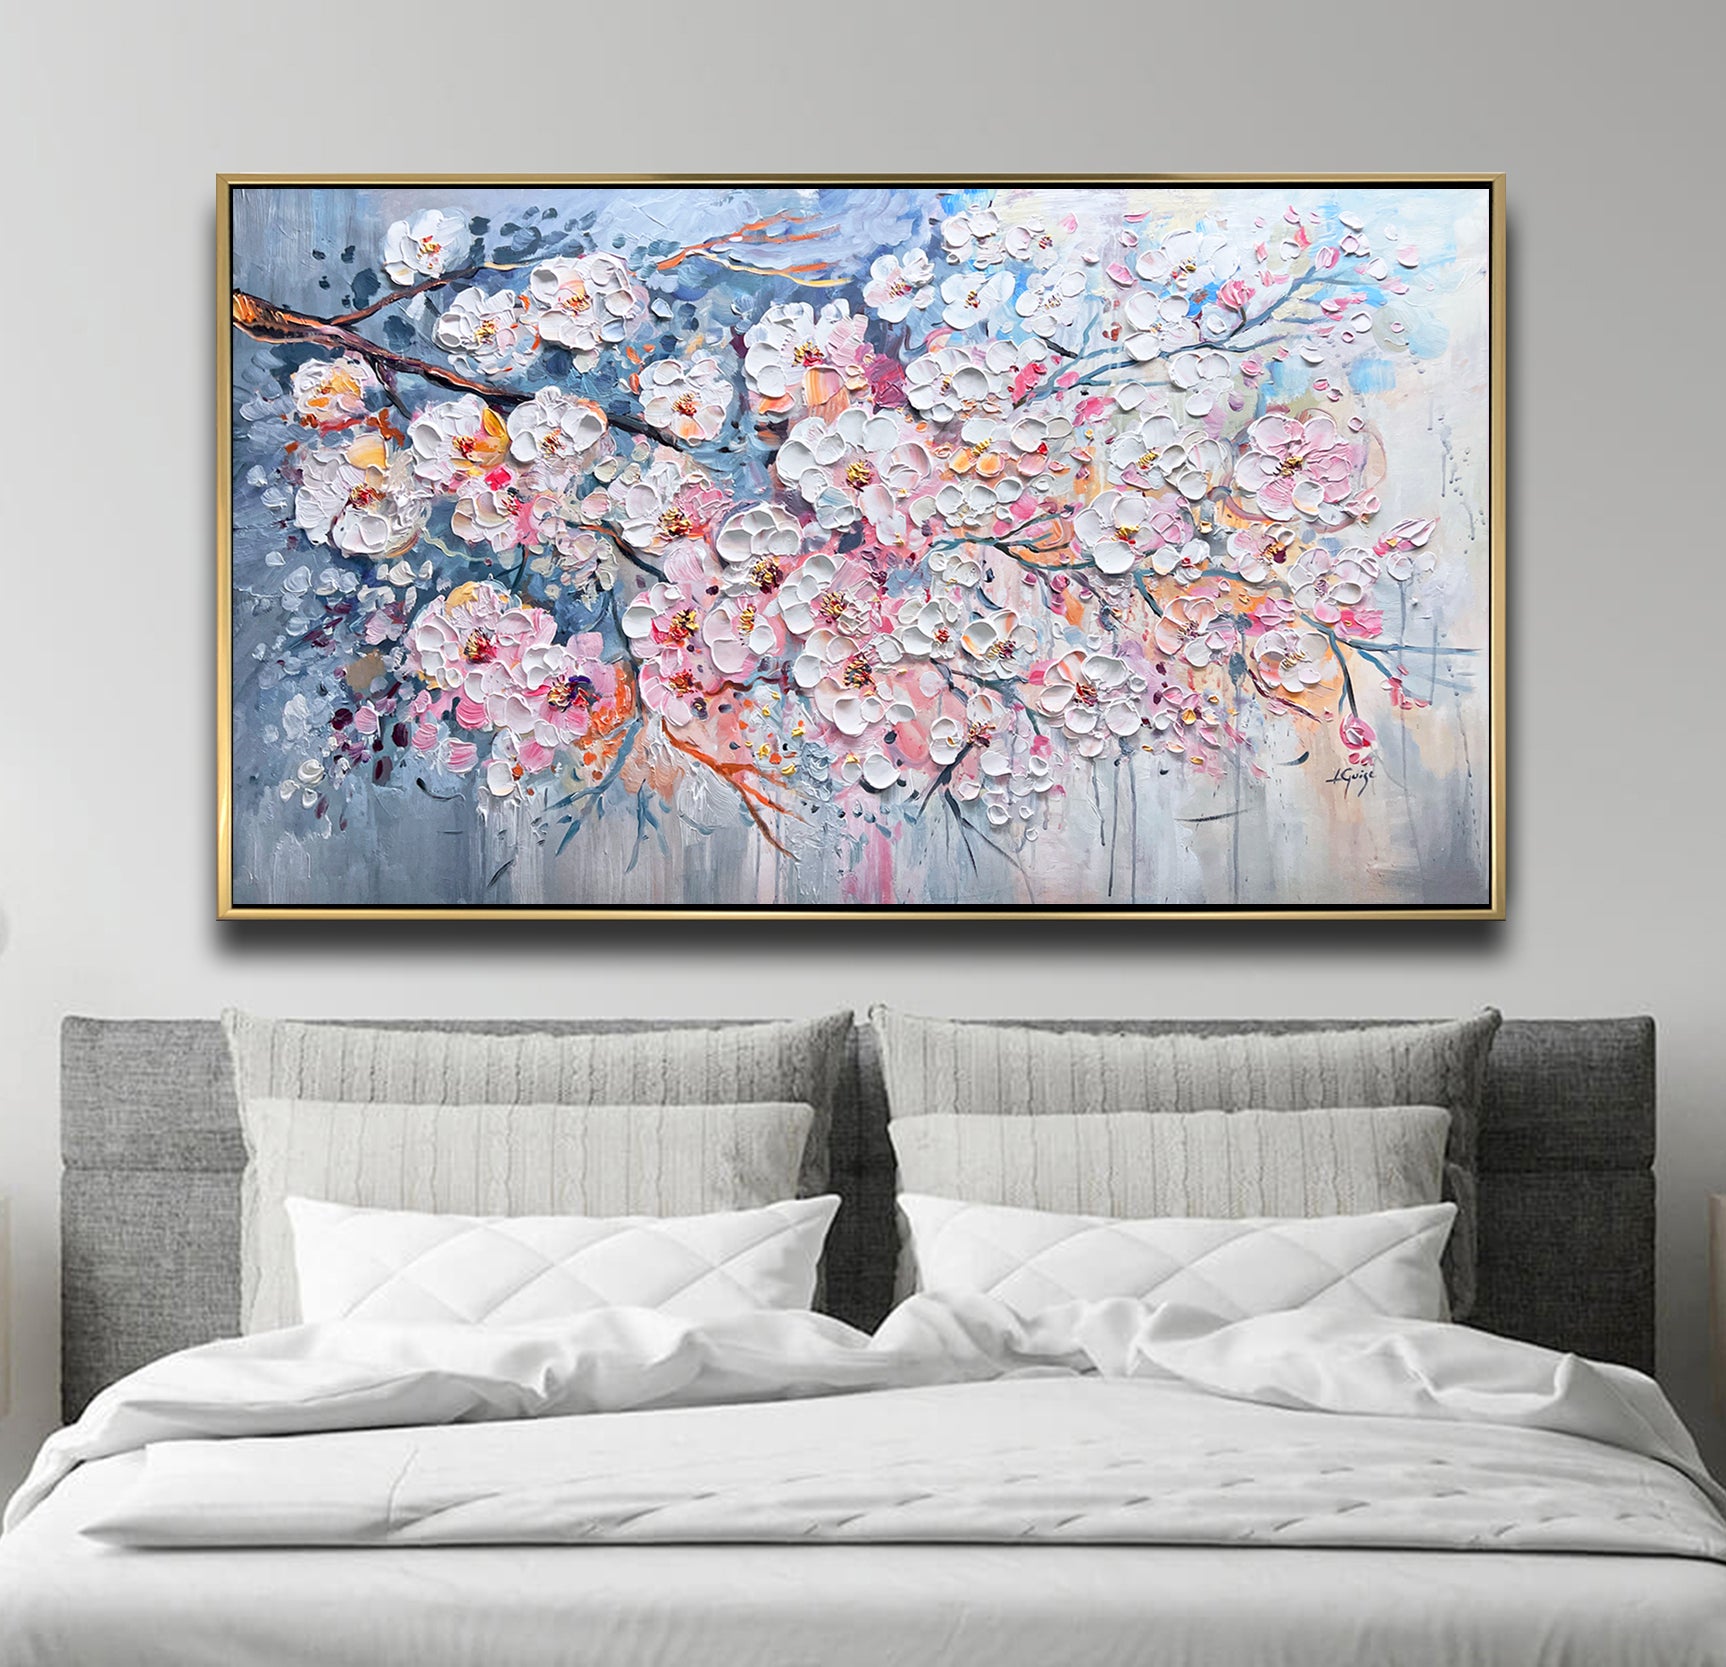 a large painting on a wall above a bed